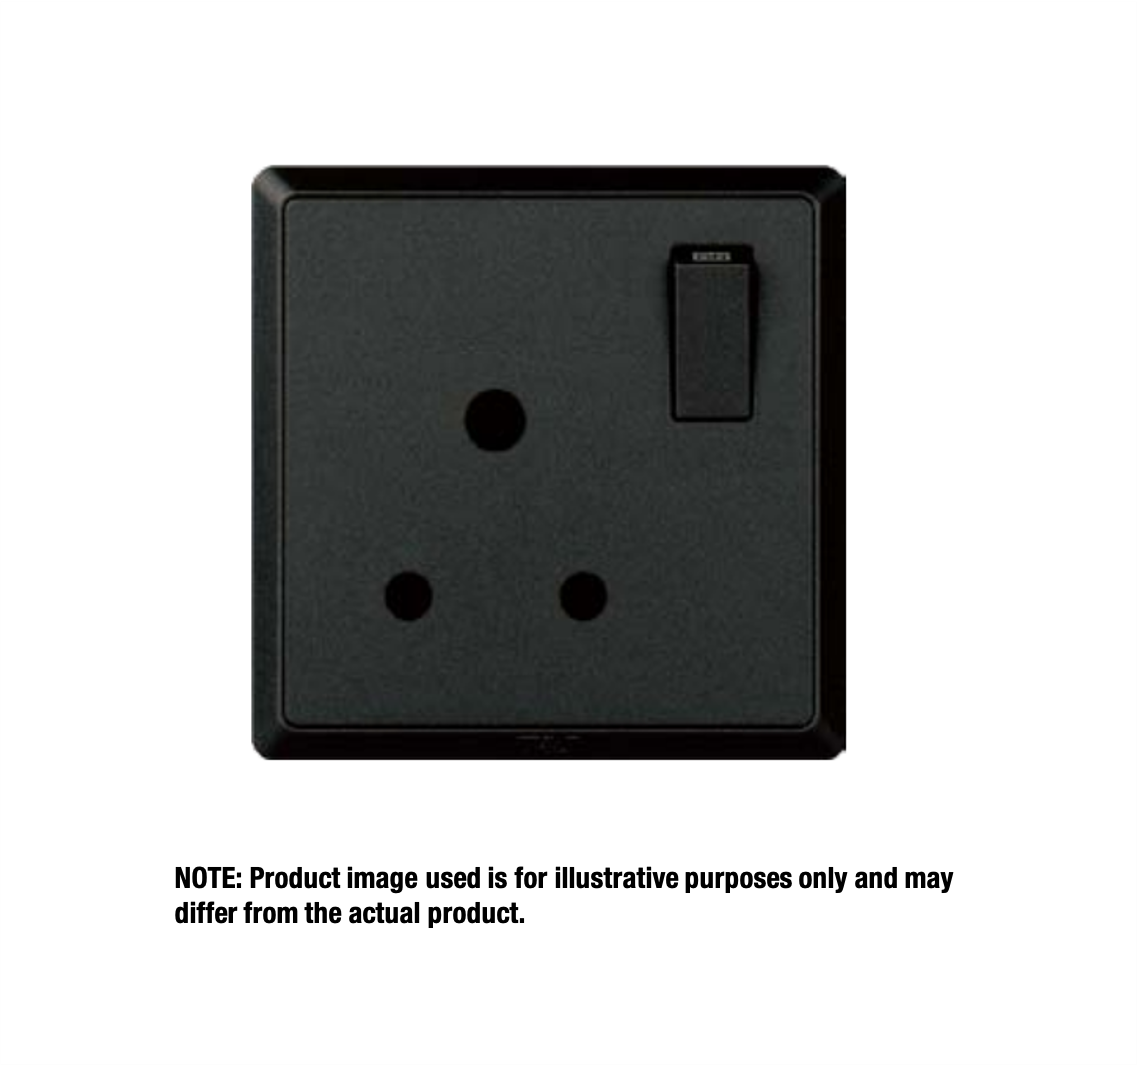 INFINIT - 6W 1 Gang Volume Switch with Emergency Alarm (Charcoal Black)